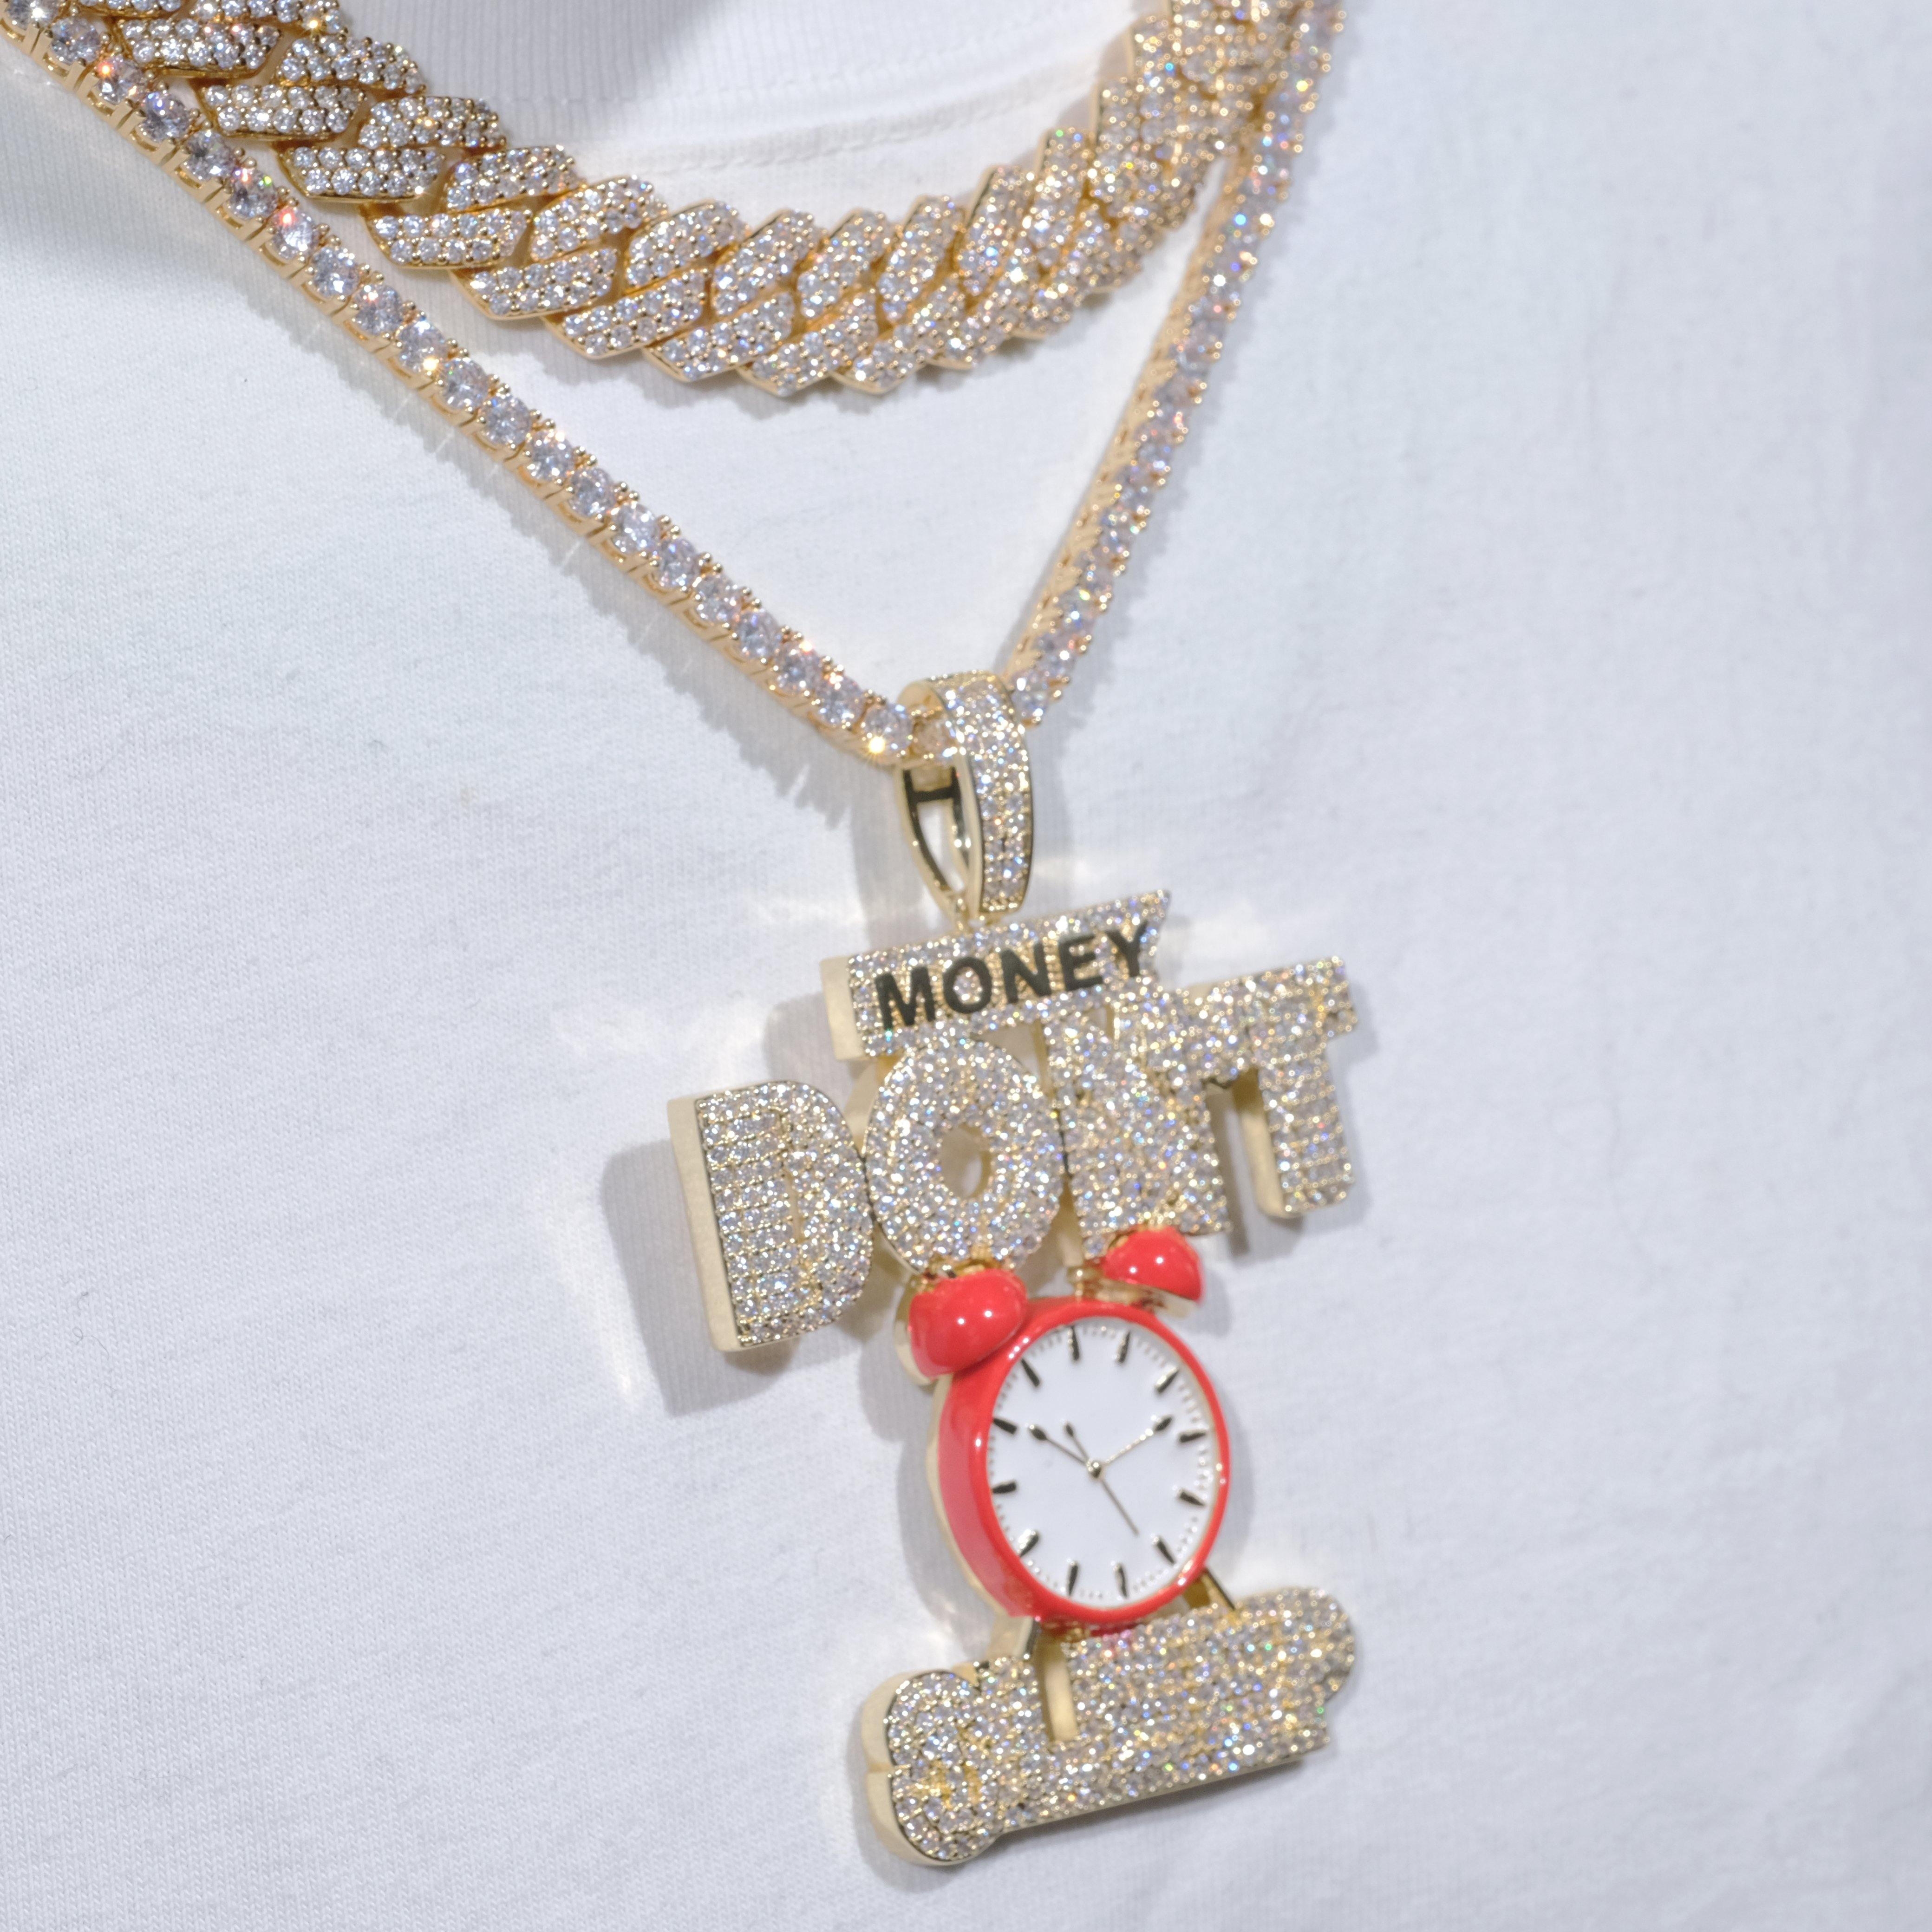 18K Gold-Plated Money Dont Sleep Iced Necklace